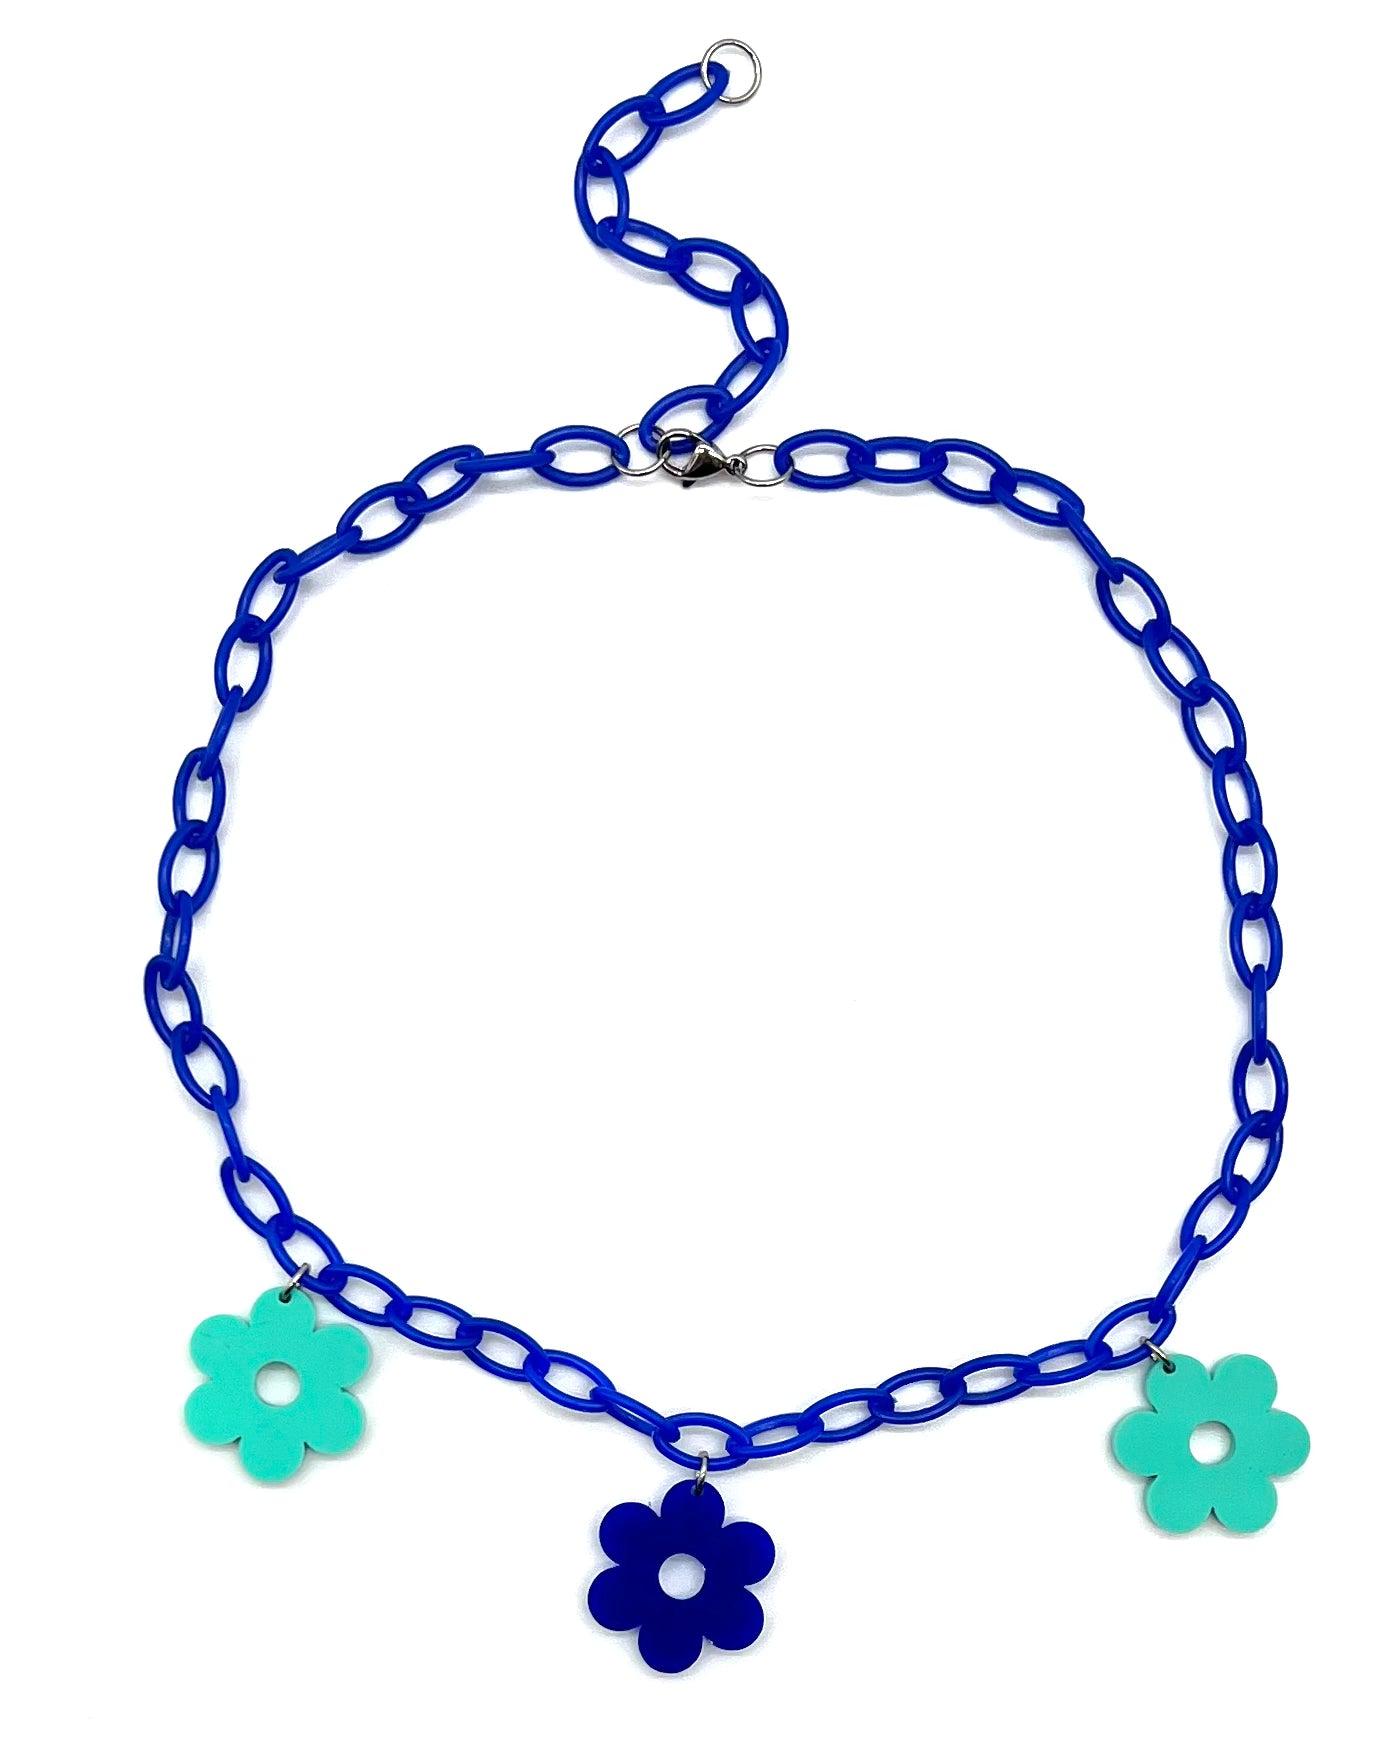 The Flower Power Blue Choker featuring a navy plastic chain with three alternating blue and teal daisy charms.